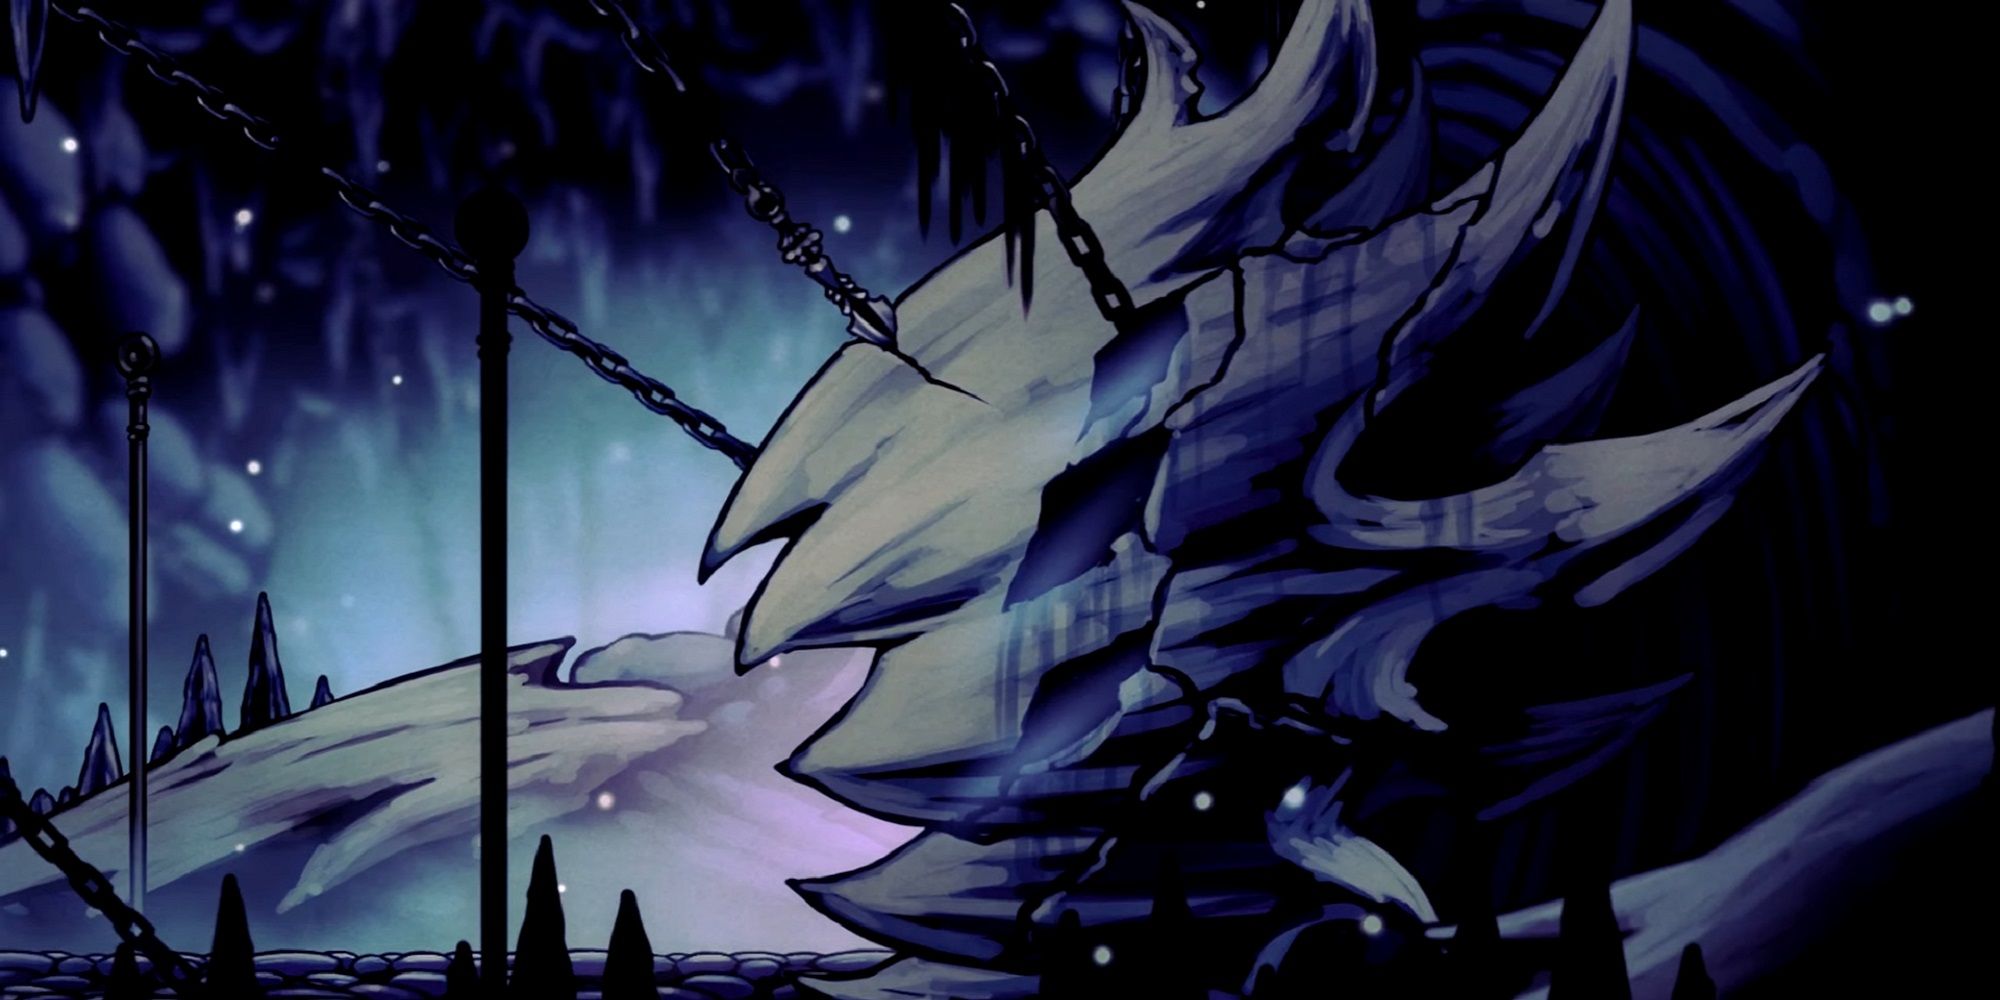 A dead Wyrm from Hollow Knight.